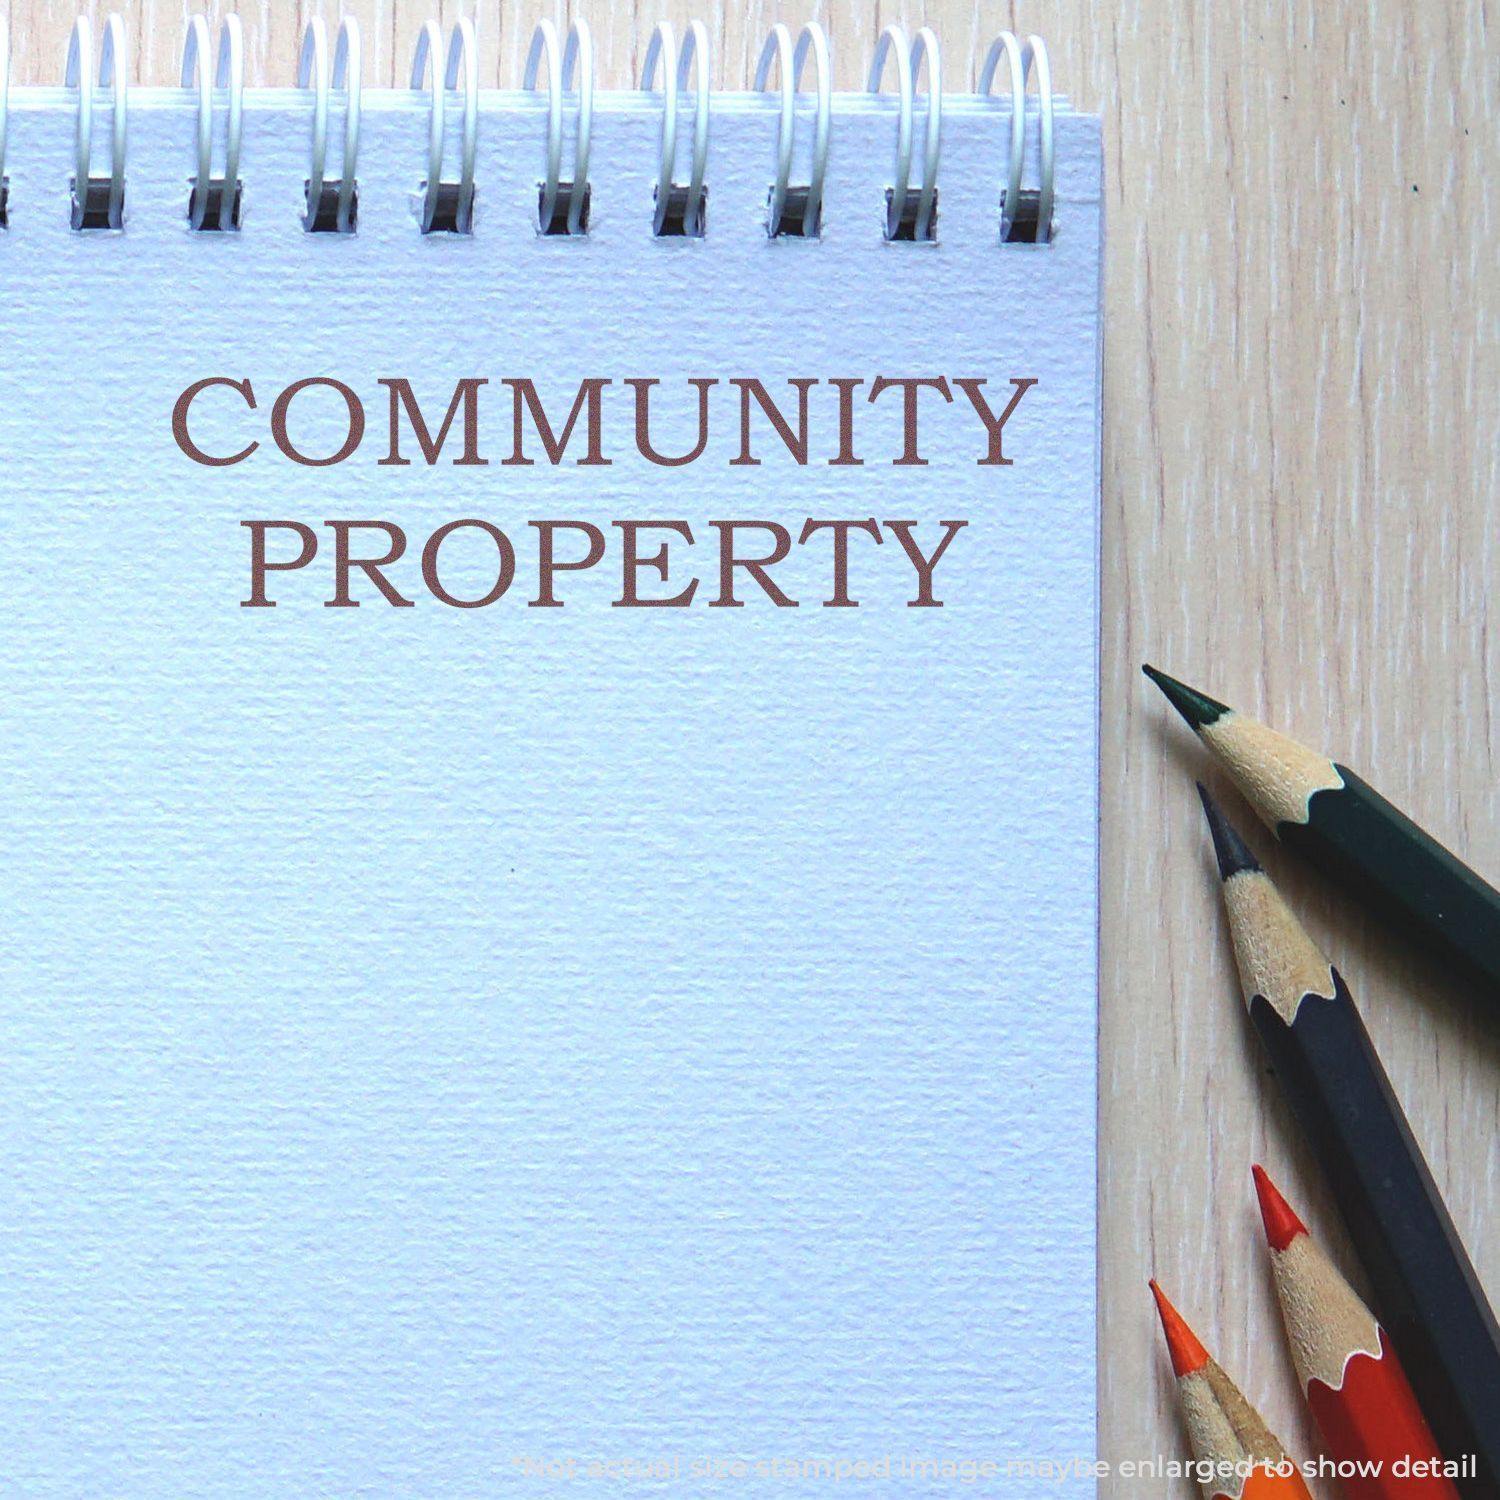 A stock office rubber stamp with a stamped image showing how the text "COMMUNITY PROPERTY" is displayed after stamping.